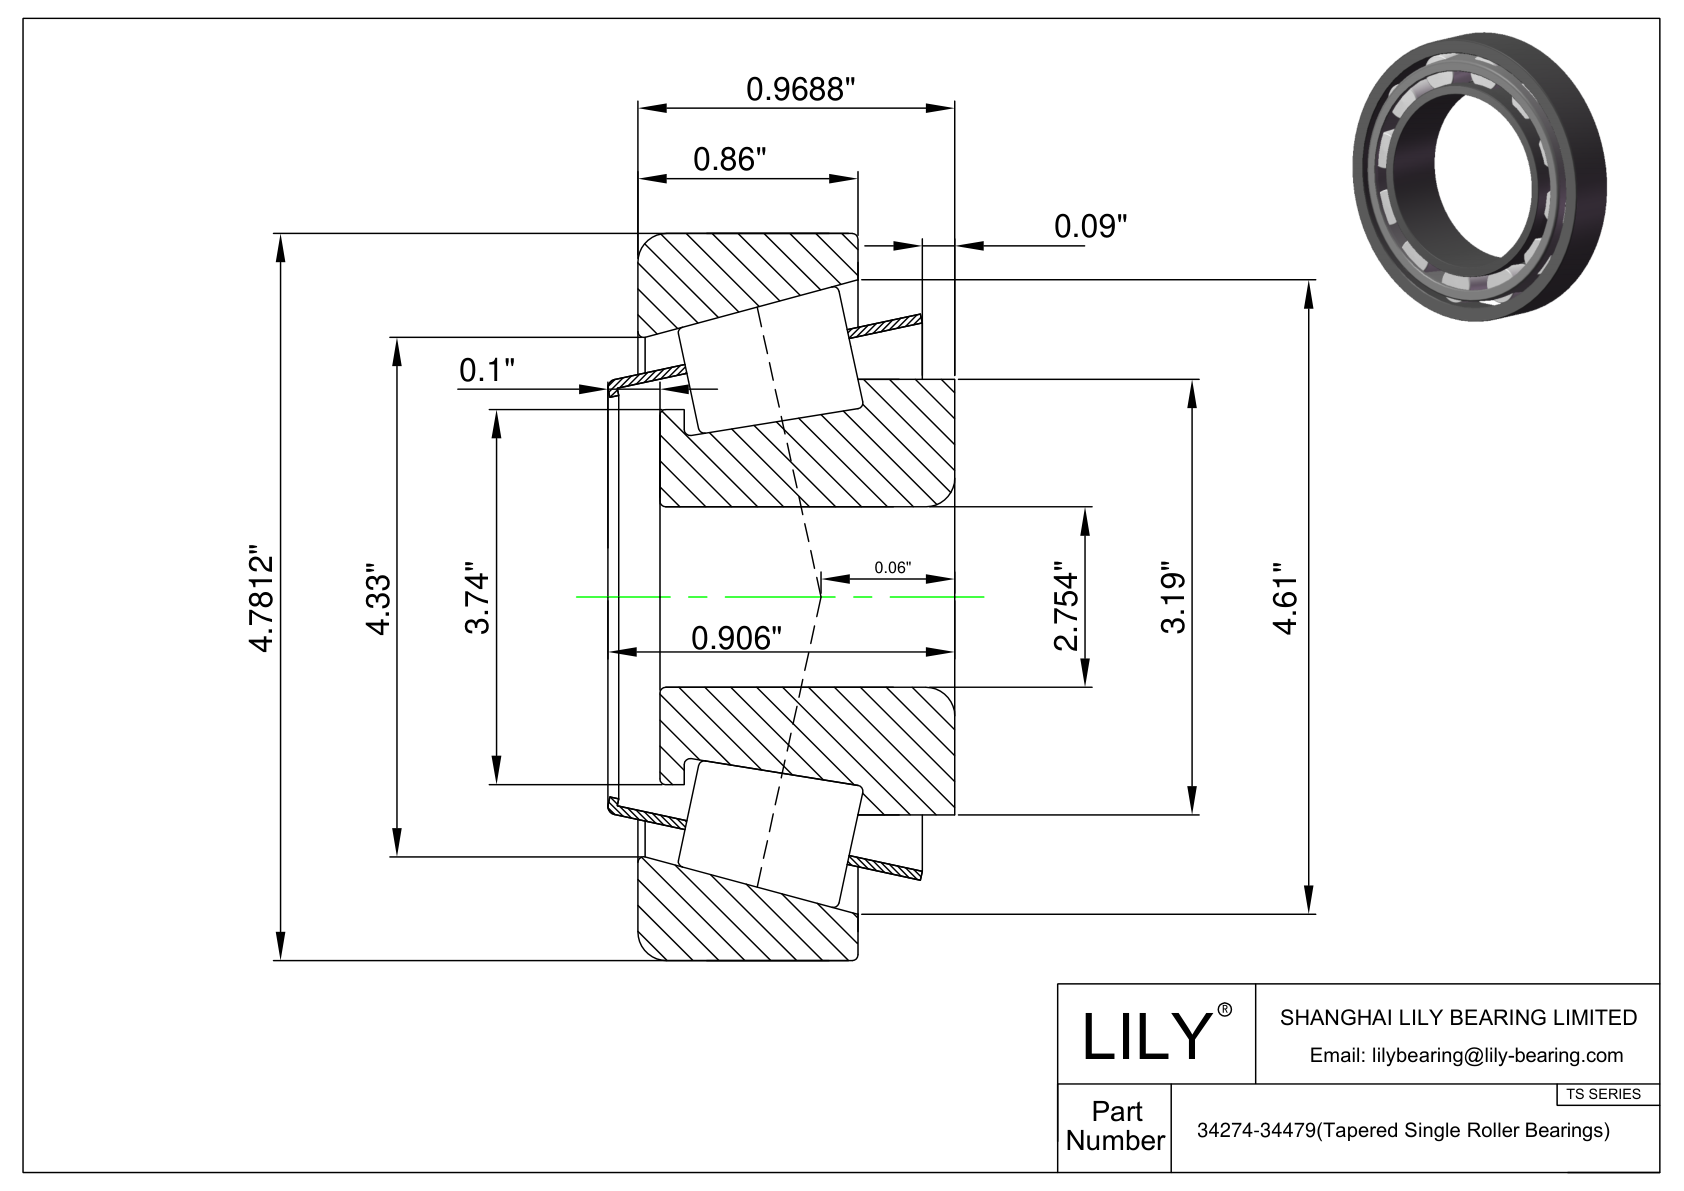 34274-34479 TS (Tapered Single Roller Bearings) (Imperial) cad drawing